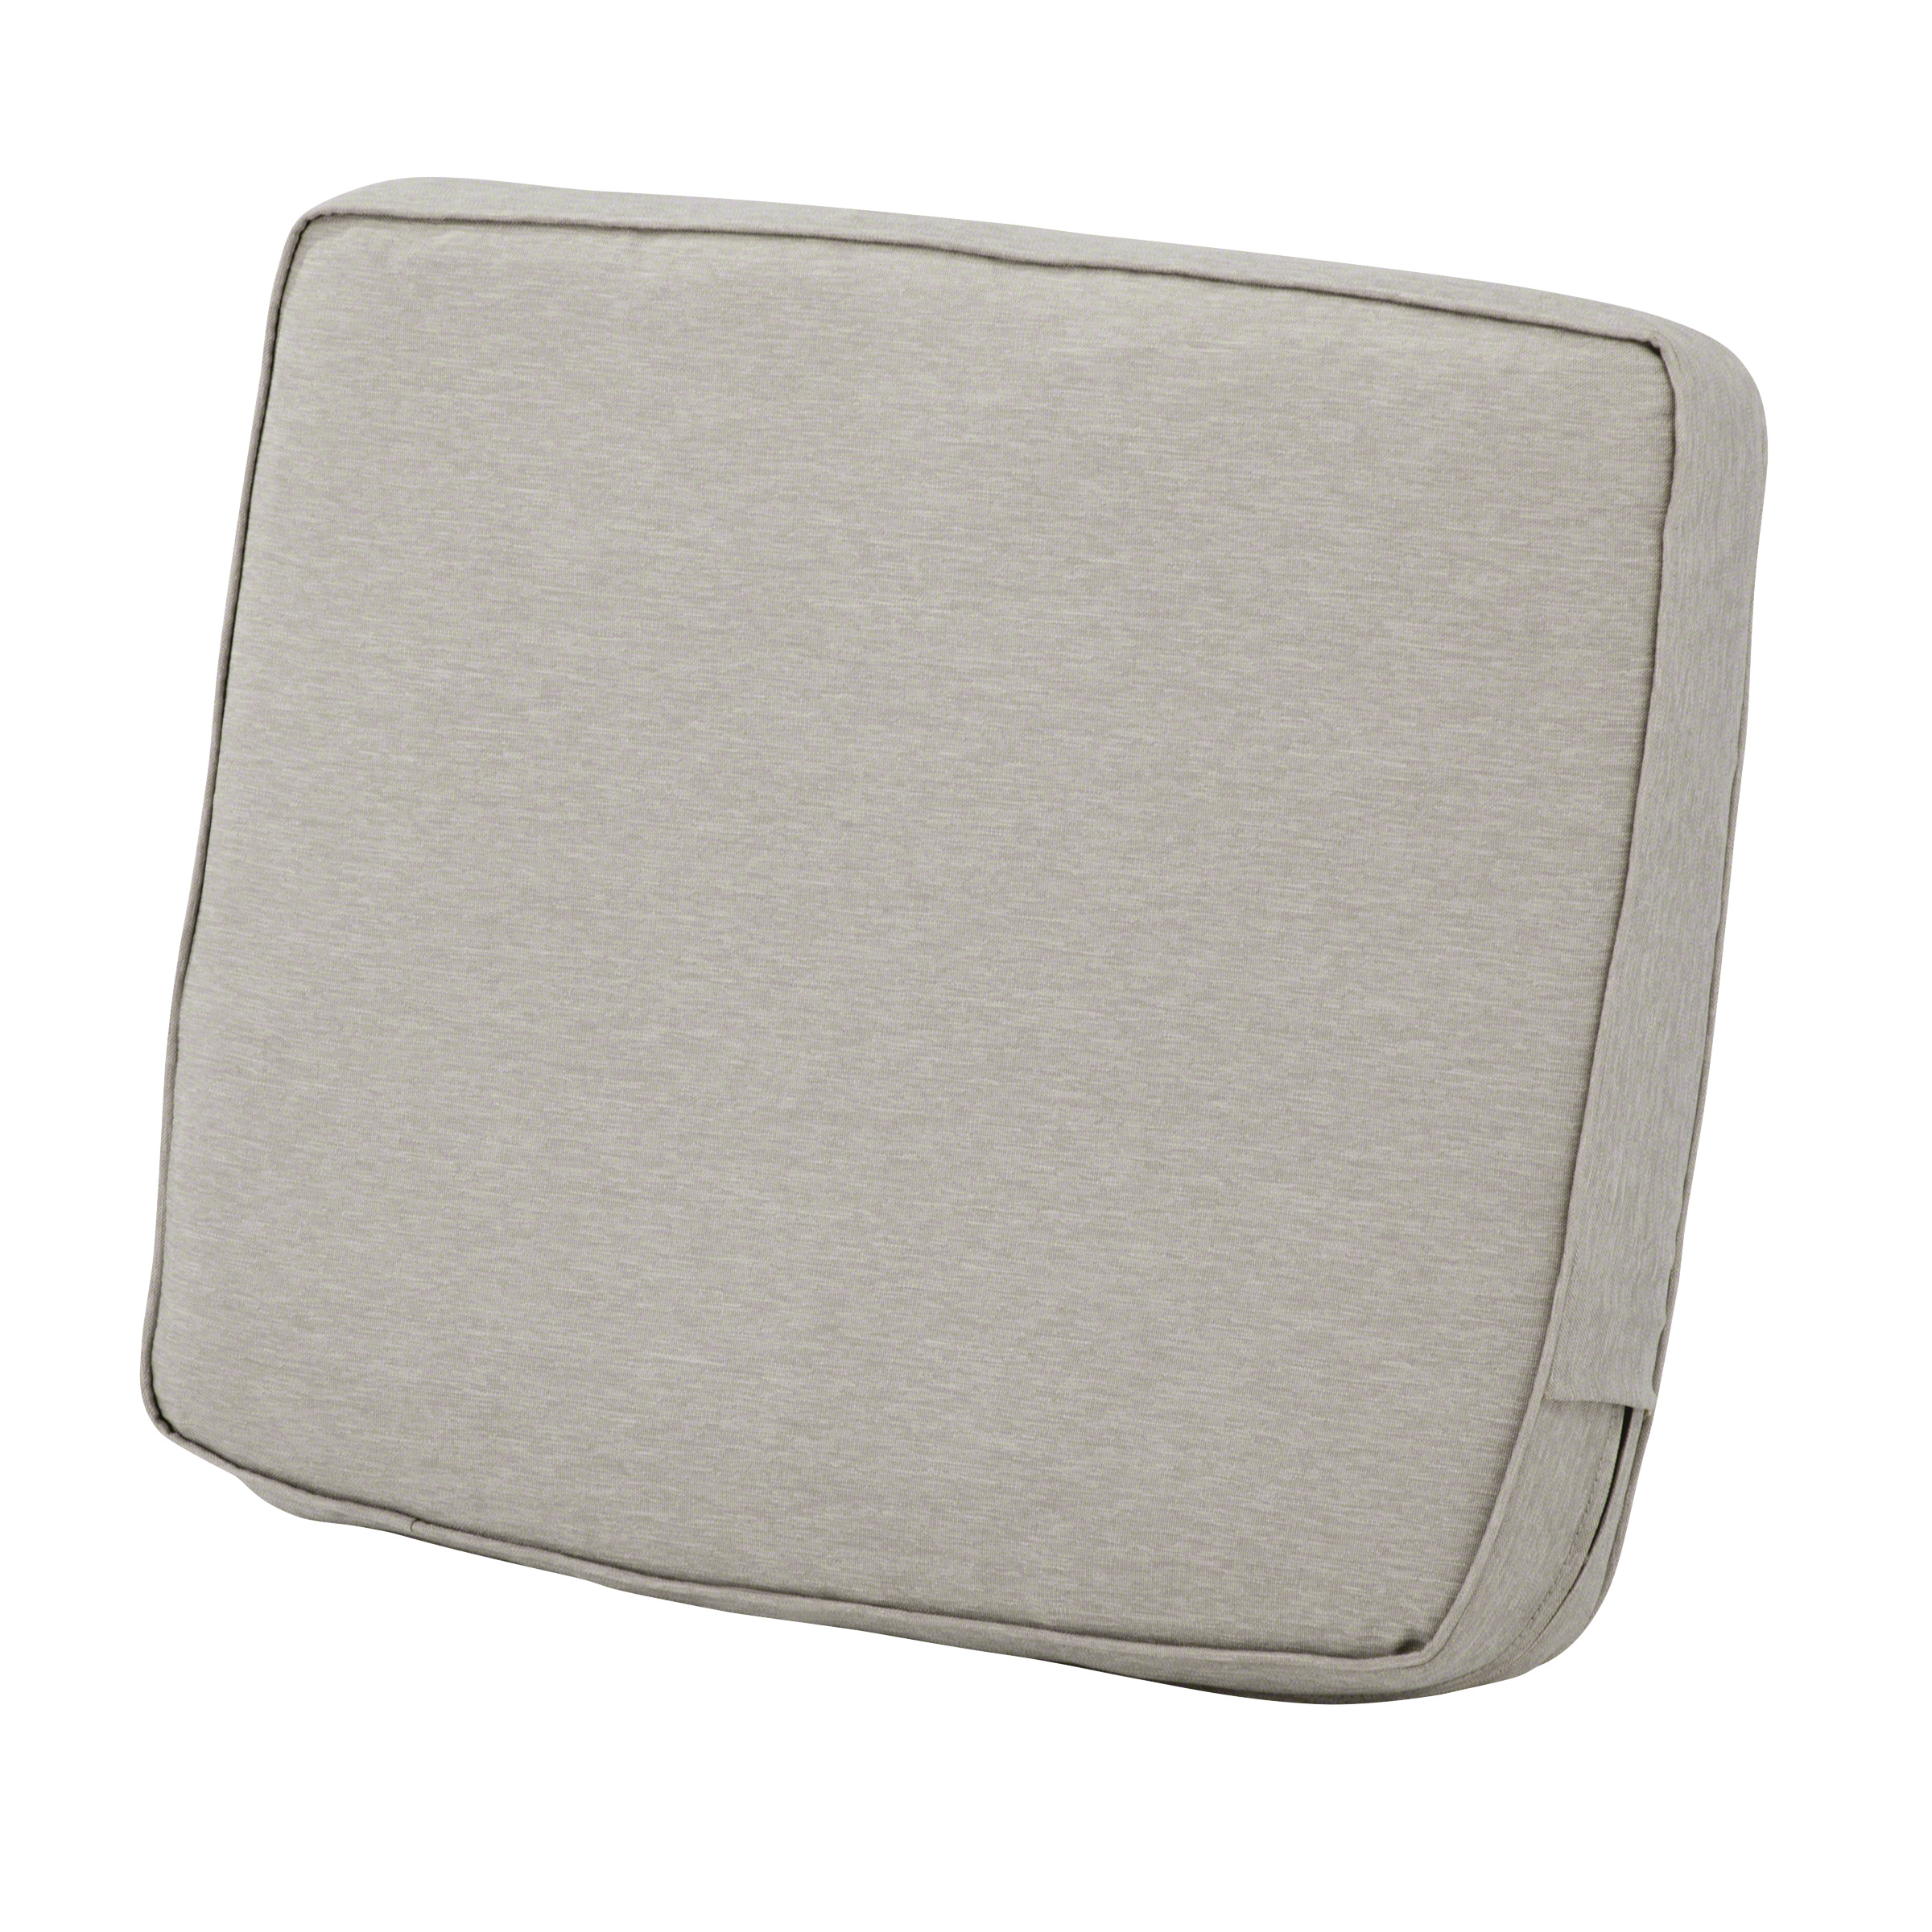 Classic Accessories Patio Lounge Back Cushion, Heather Gray, 21"x20"x4"